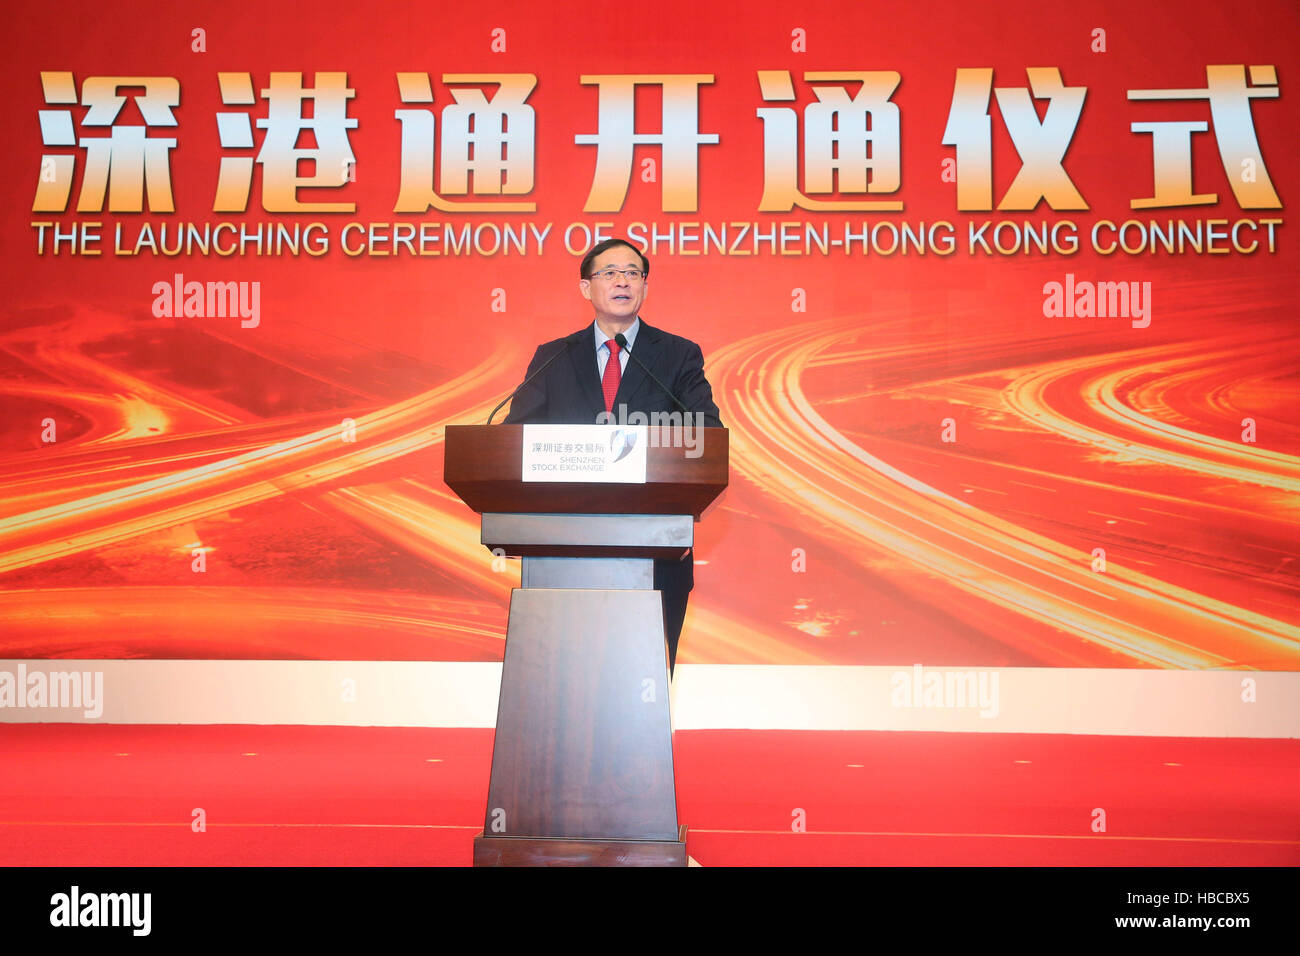 Shenzhen. 5th Dec, 2016. Liu Shiyu, chairman of the China Securities Regulatory Commission, addresses a launching ceremony of the Shenzhen-Hong Kong Stock Connect in Shenzhen, south China's Guangdong Province, Dec. 5, 2016. The Shenzhen-Hong Kong Stock Connect, the second link between bourses in the Chinese mainland and Hong Kong, made a debut on Monday. © Xinhua/Alamy Live News Stock Photo